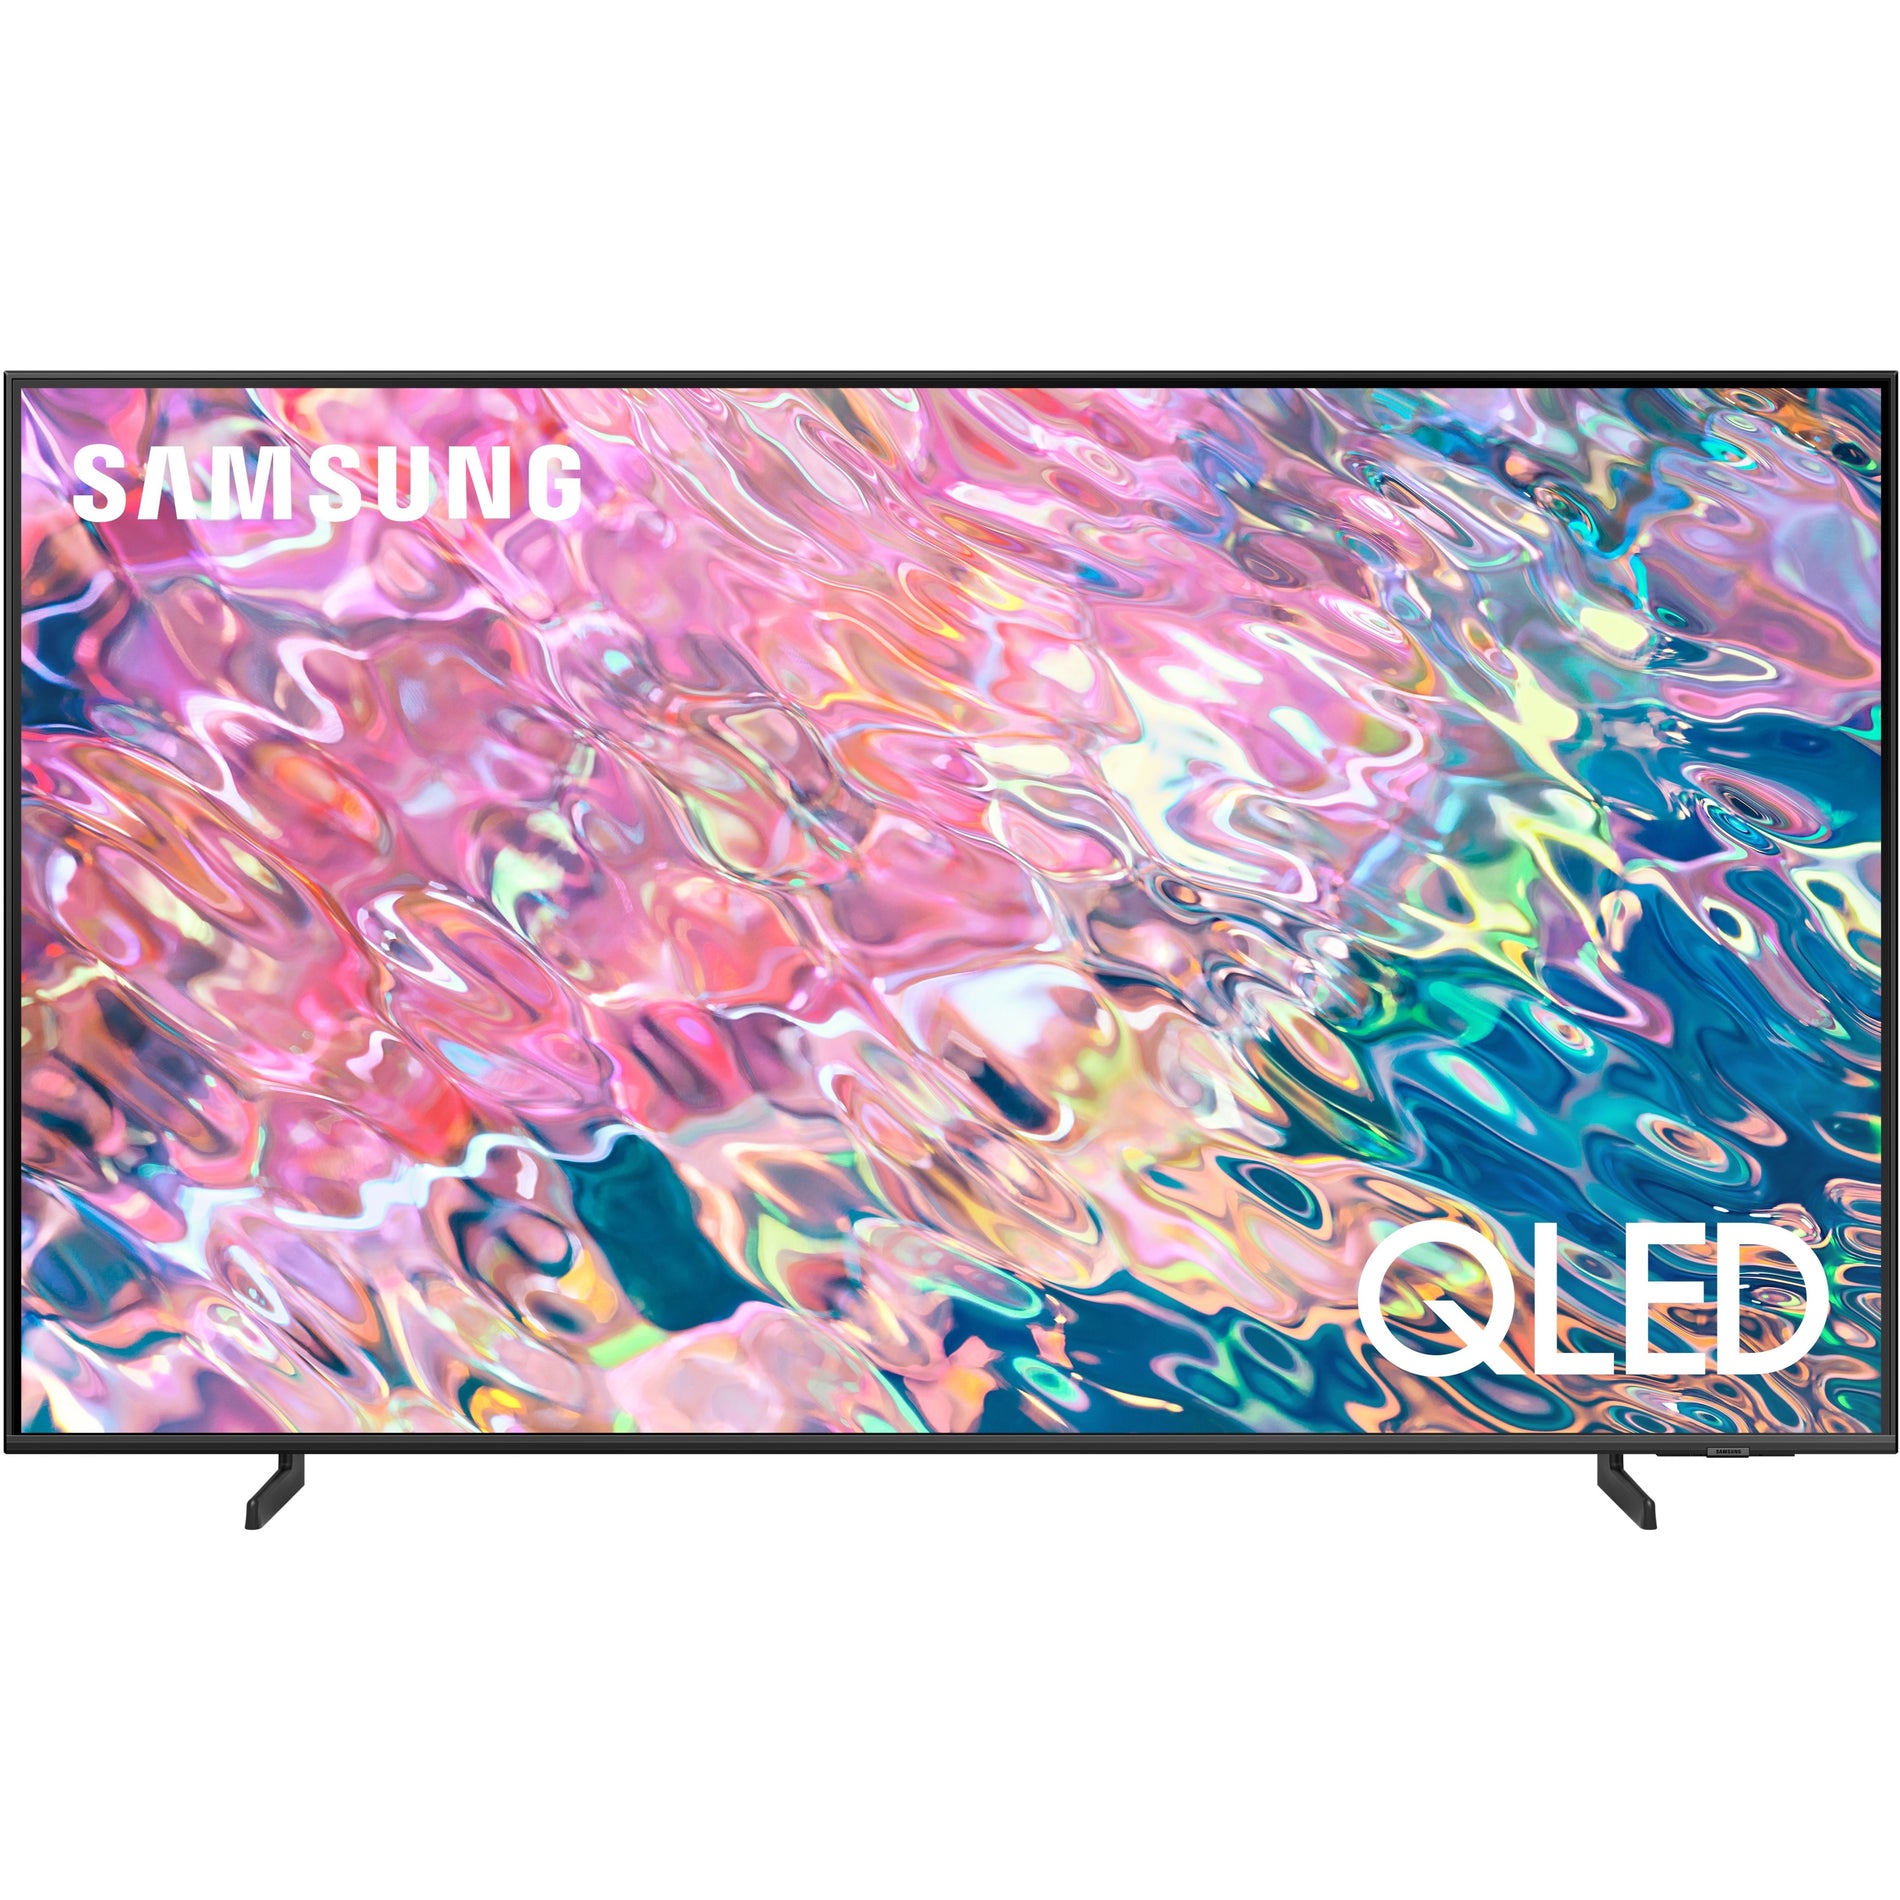 Samsung 60" QLED 2160p 120Hz 4K, Dual LED, Smart TV, 3 HMDI ports, Color Volume 100% (Quantum Dot), Quantum Processor Lite 4K with AI Upscaling, Object Tracking Sound, Ambient Mode, Included Accessory: SolarCell Remote (QN60Q60BAFXZA) [Discontinued]